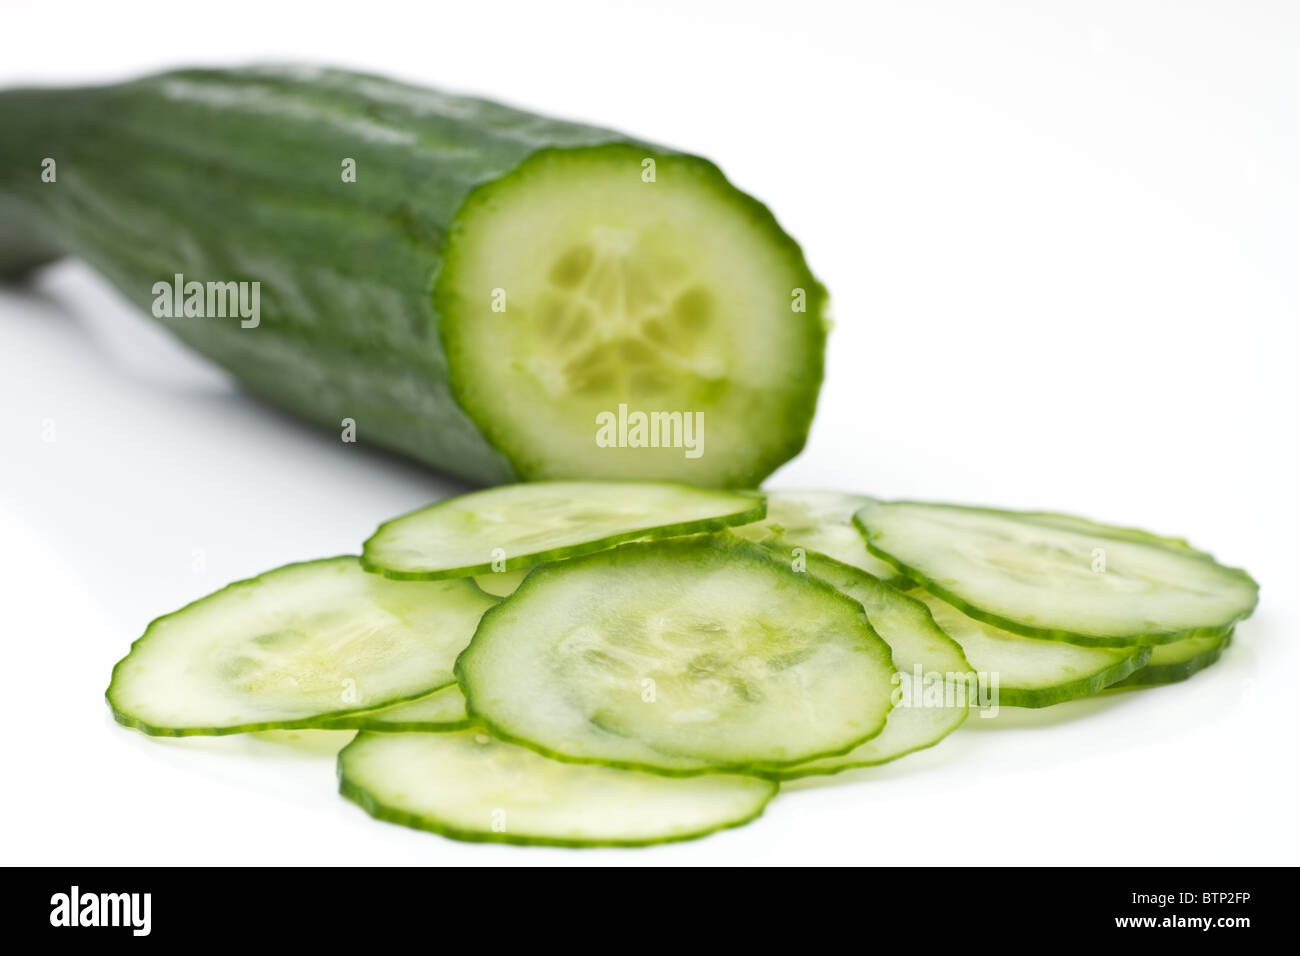 Cucumber with slices Stock Photo